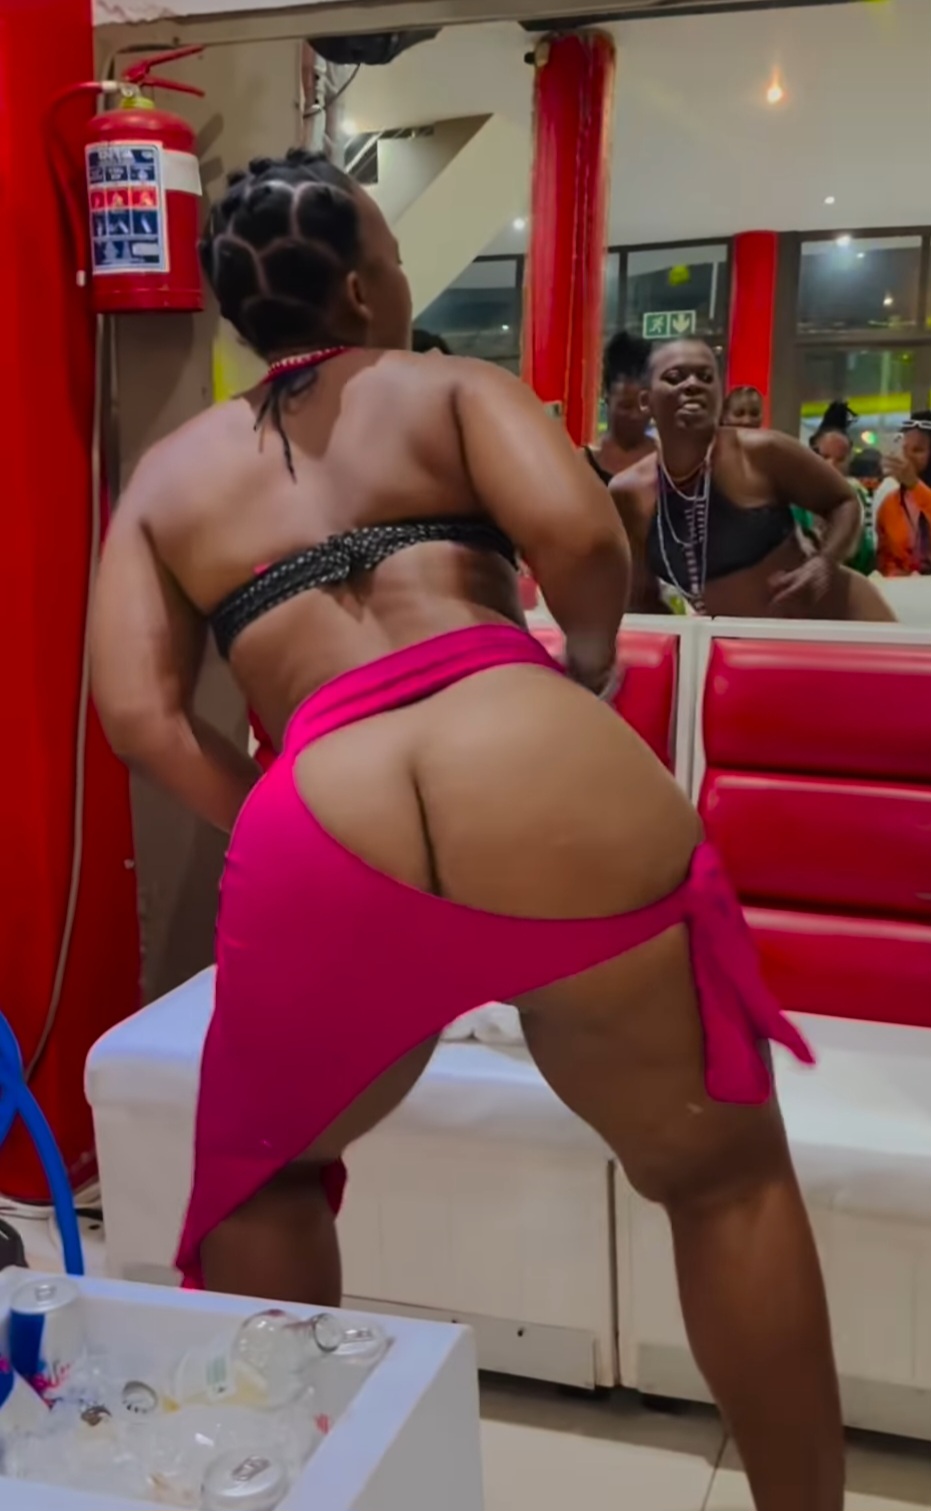 Zodwa Libram reacts after being called out for dancing without underwear and putting her bare bum on display